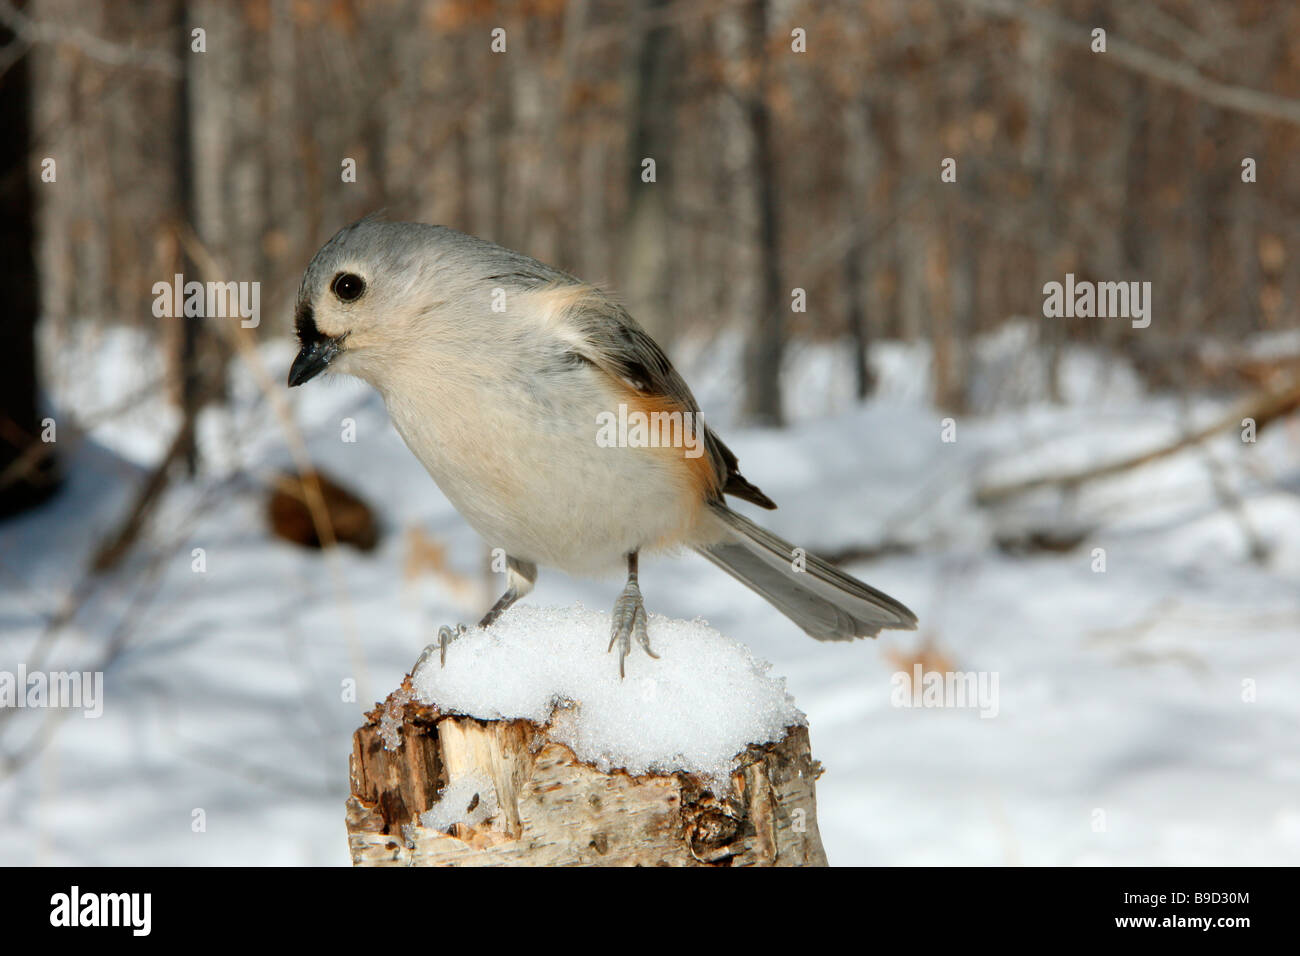 Tufted Titmouse Perched on Stump in Winter Snow Stock Photo